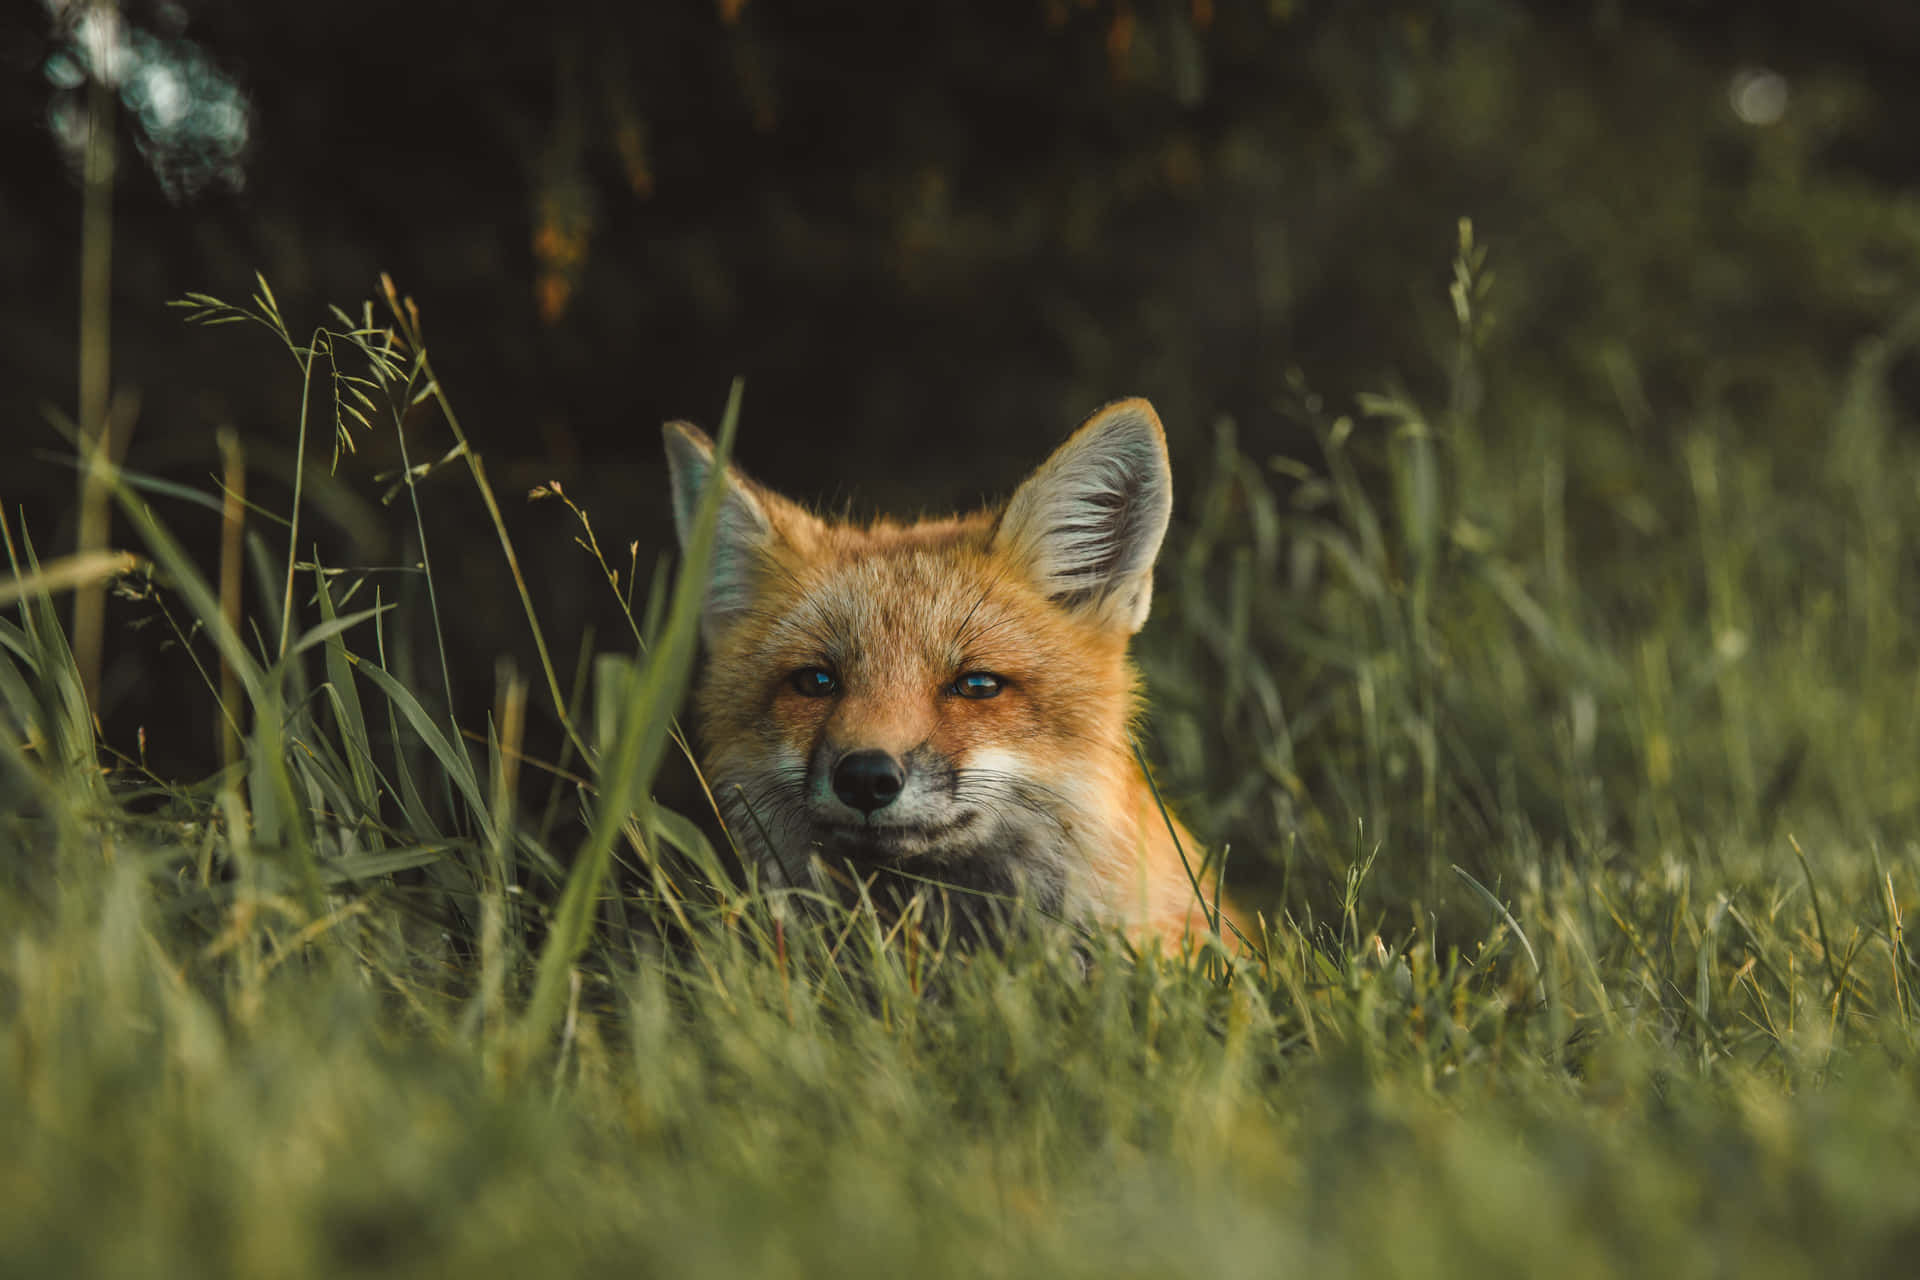 A Fox Staring Out Into The Wild